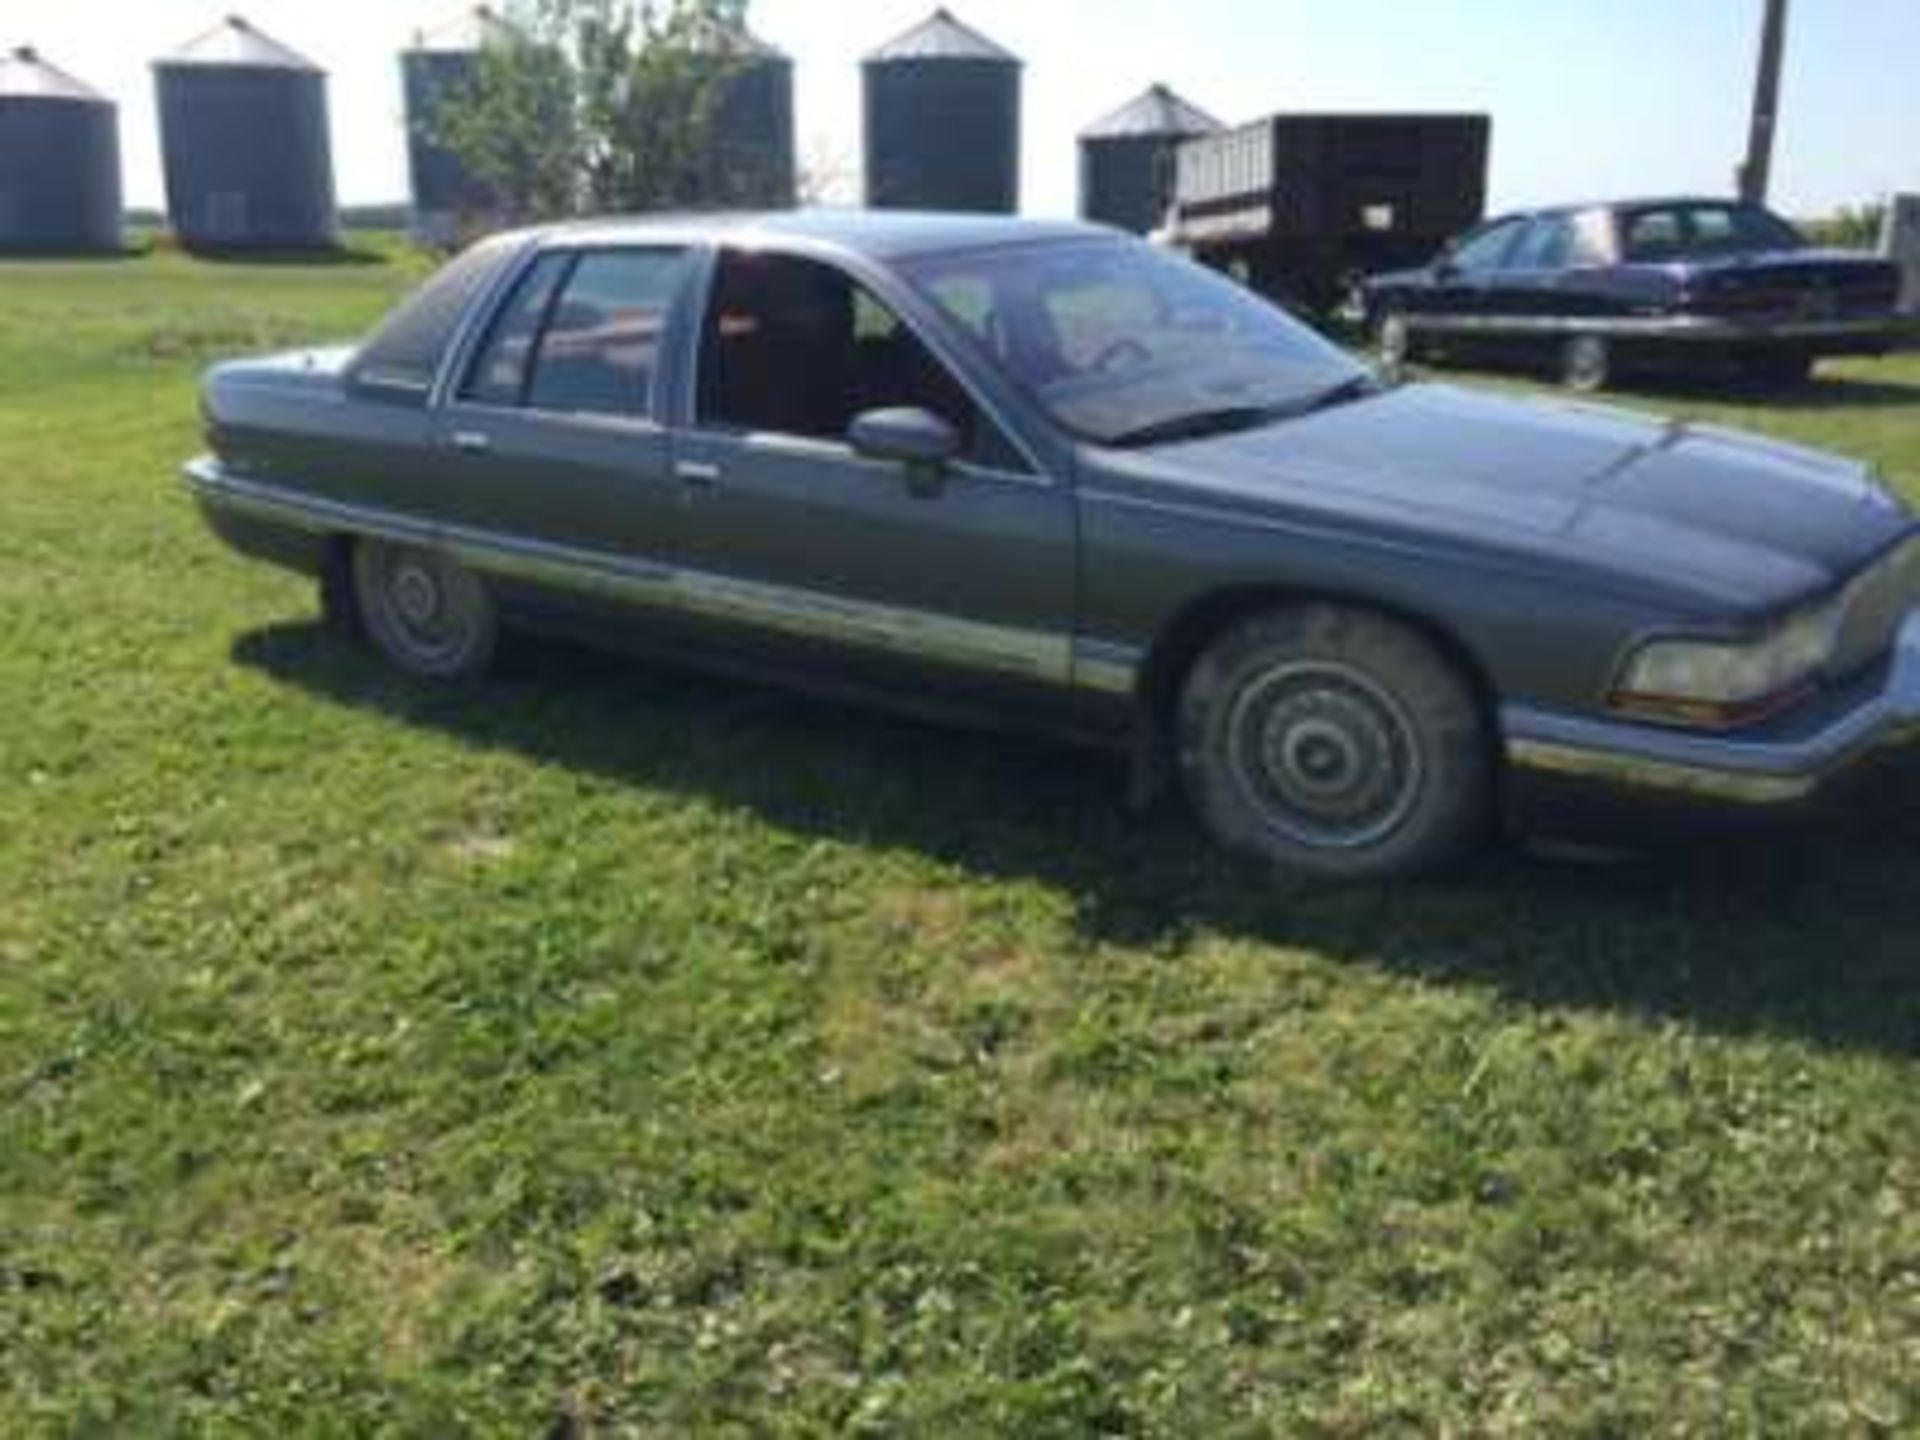 1991 Buick Roadmaster Car, 4dr, loaded (previously registered in SK) - Image 2 of 2